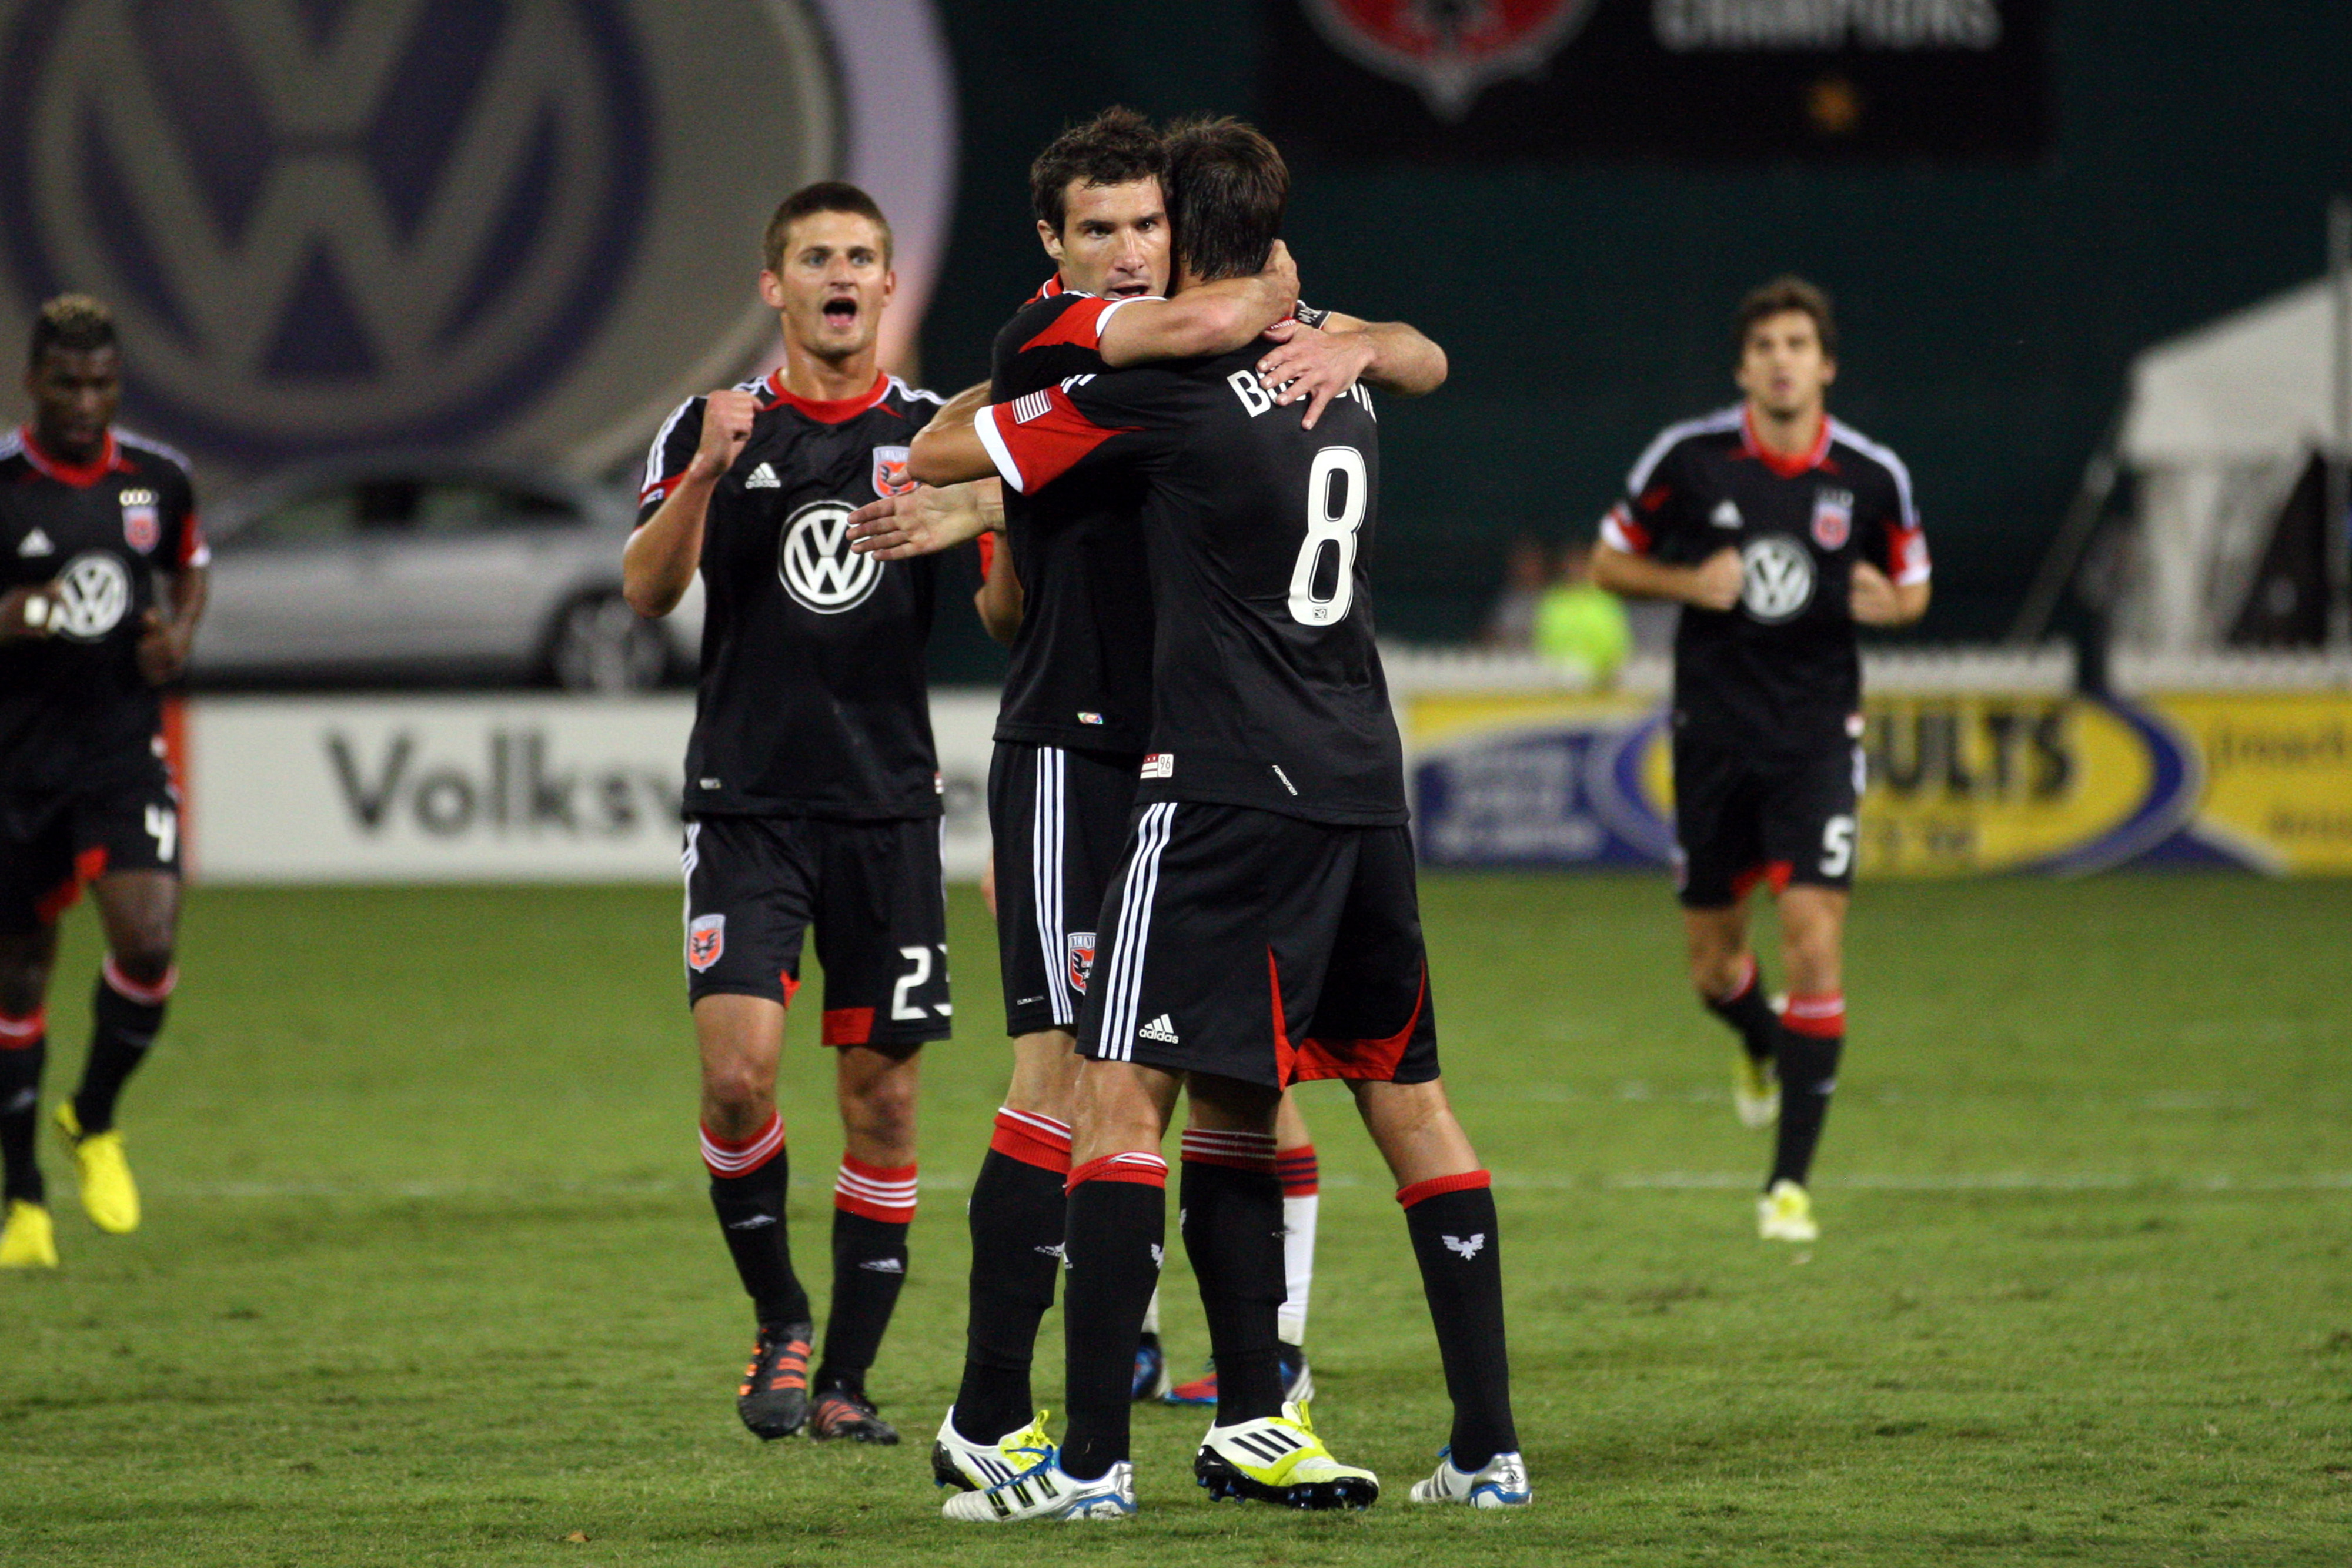 WASHINGTON, DC - SEPTEMBER 15: Chris Pontius #13 of D.C. United celebrates after his goal with Branko Boskovic #8 against # of the New England Revolution at RFK Stadium on September 15, 2012 in Washington, DC.(Photo by Ned Dishman/Getty Images)